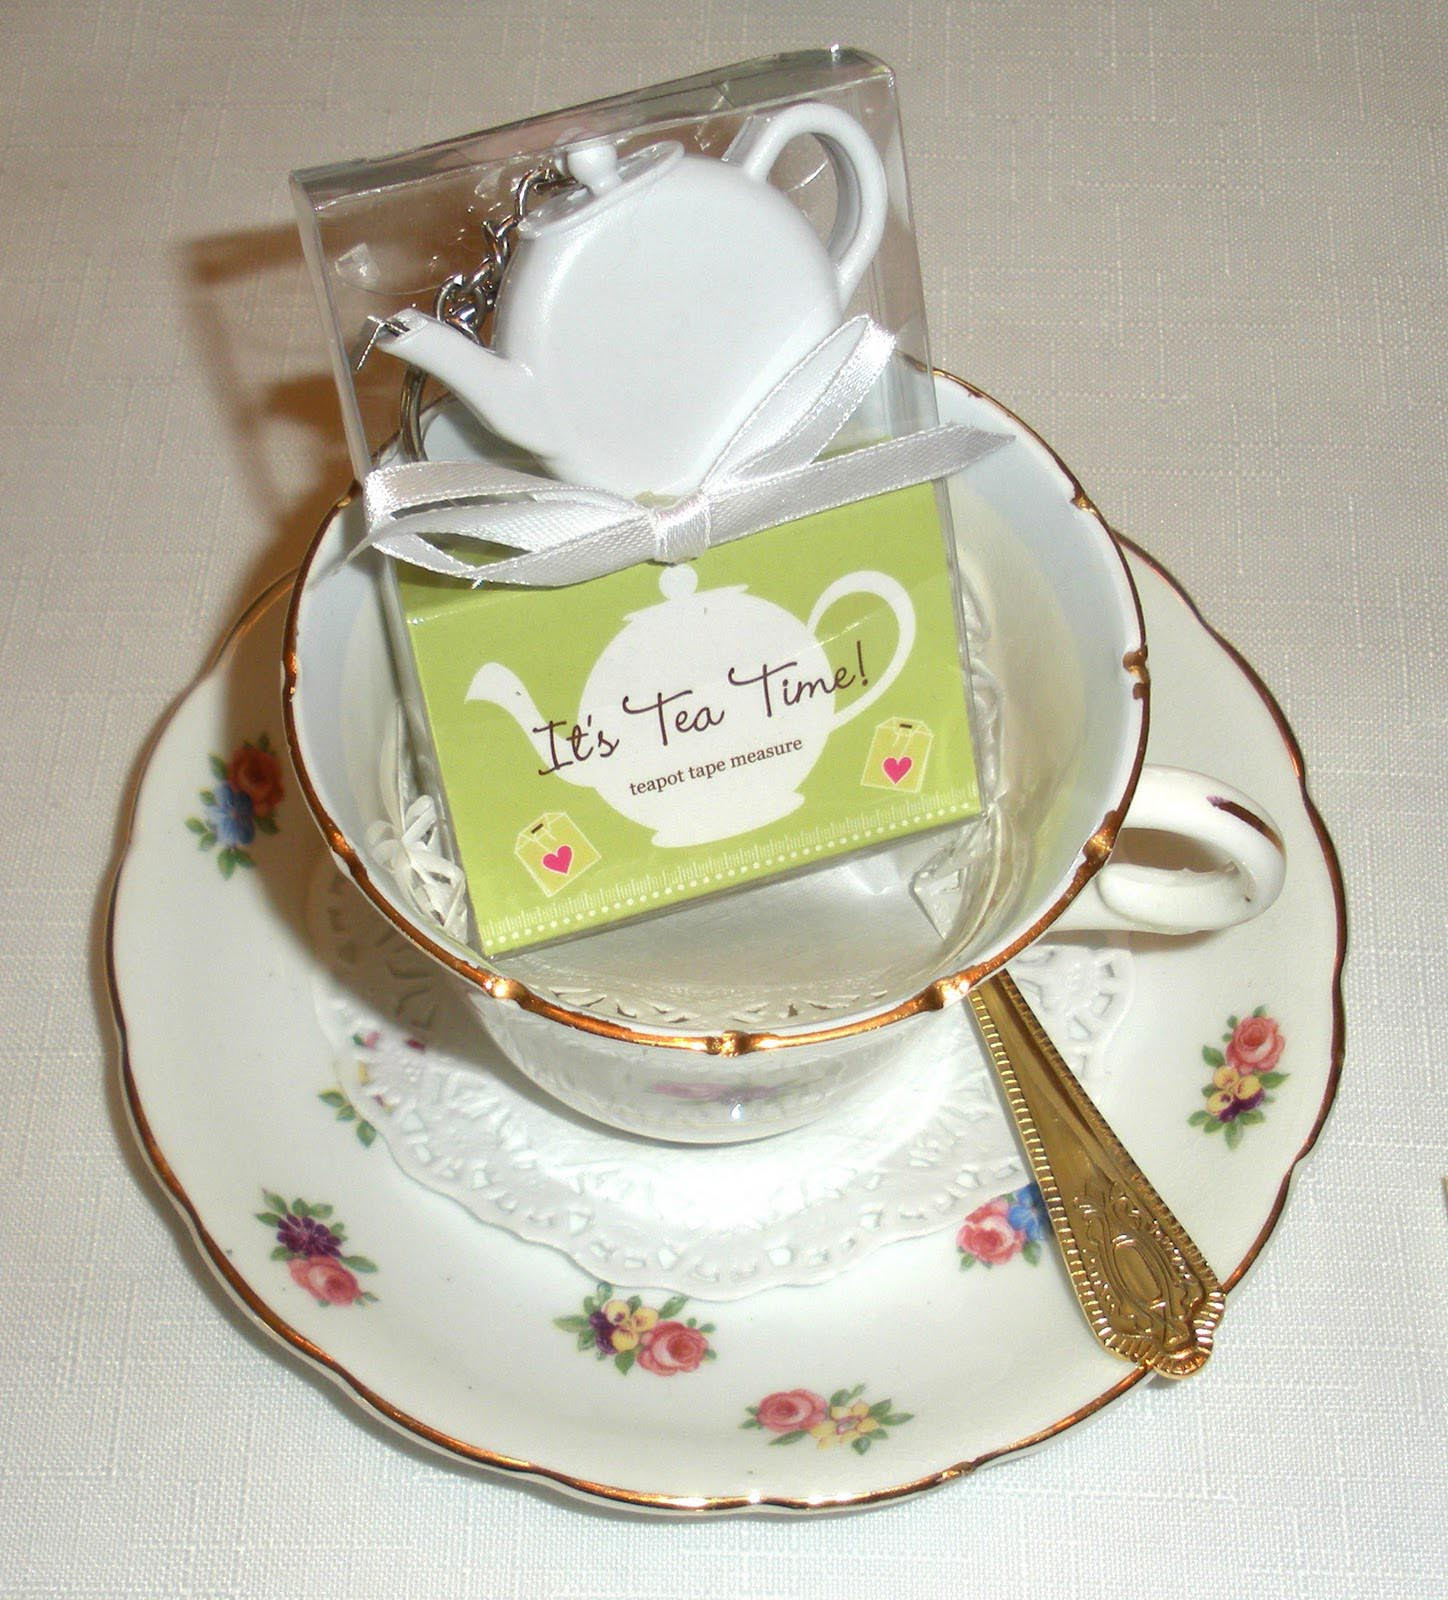 Tea Party Gift Ideas
 Afternoon Tea Party Favors